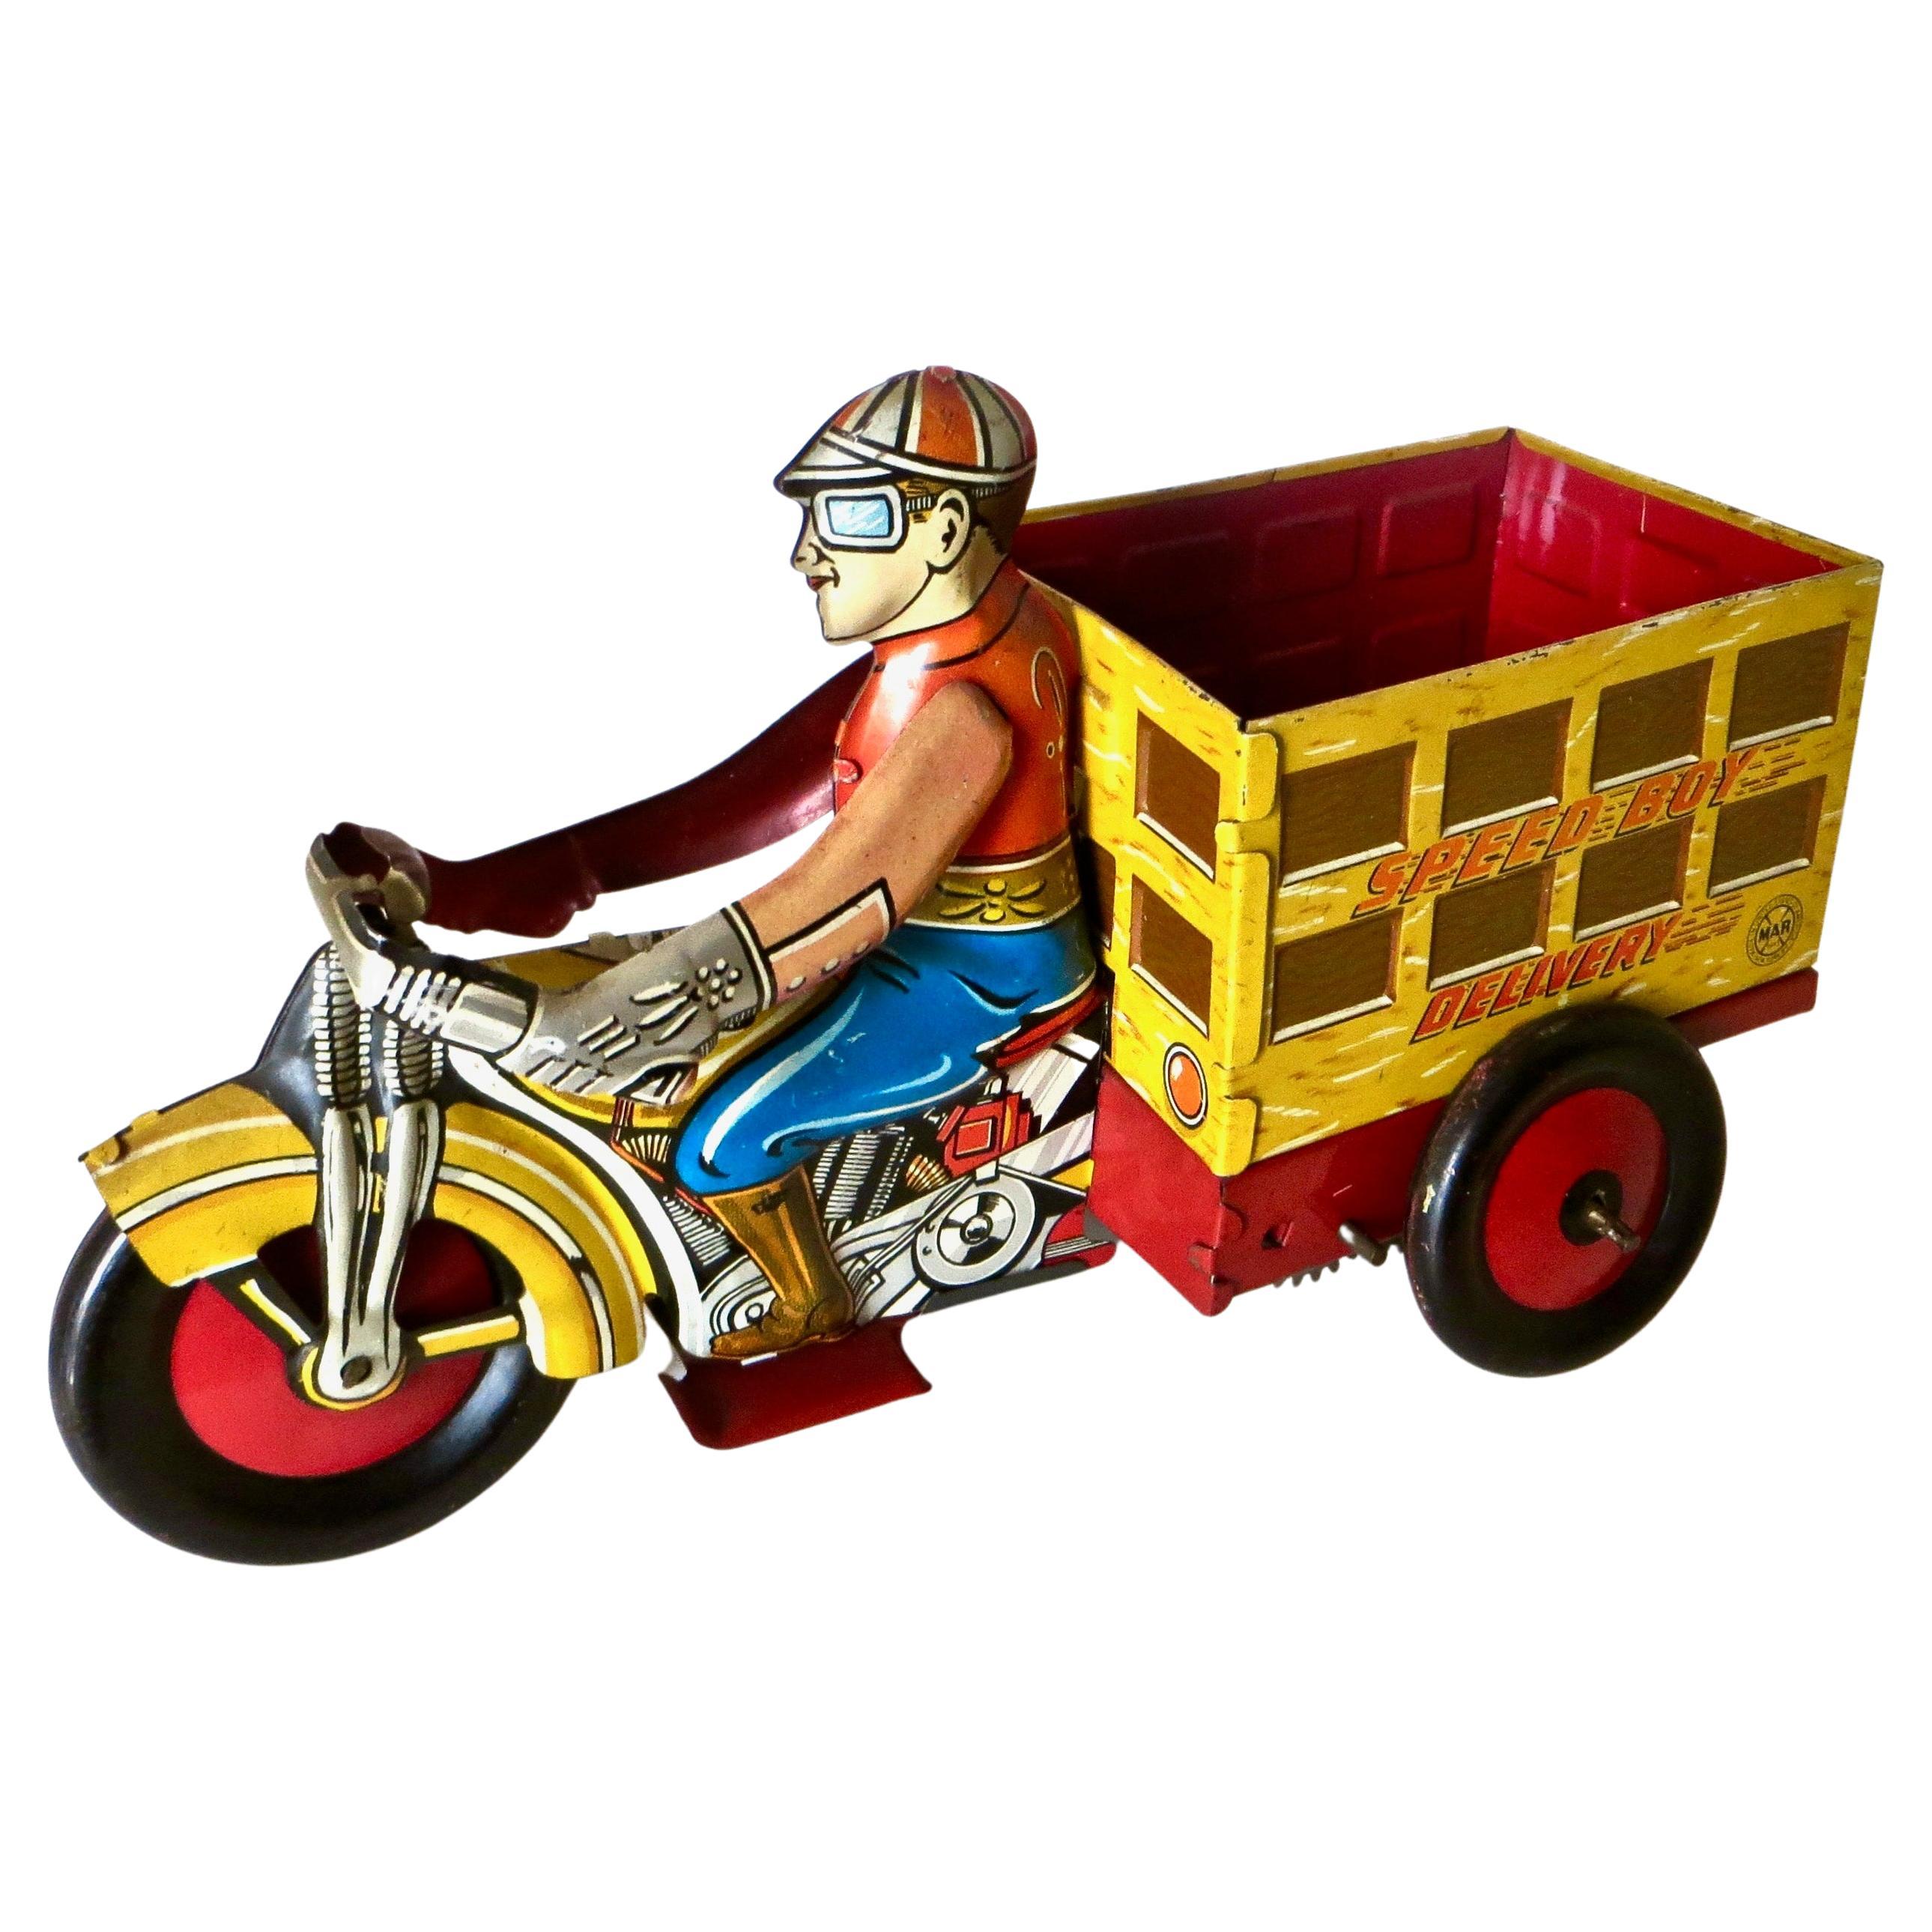 Vintage Pre-War Wind-Up Toy "Boy on Motorcycle Delivery Truck" by Marx